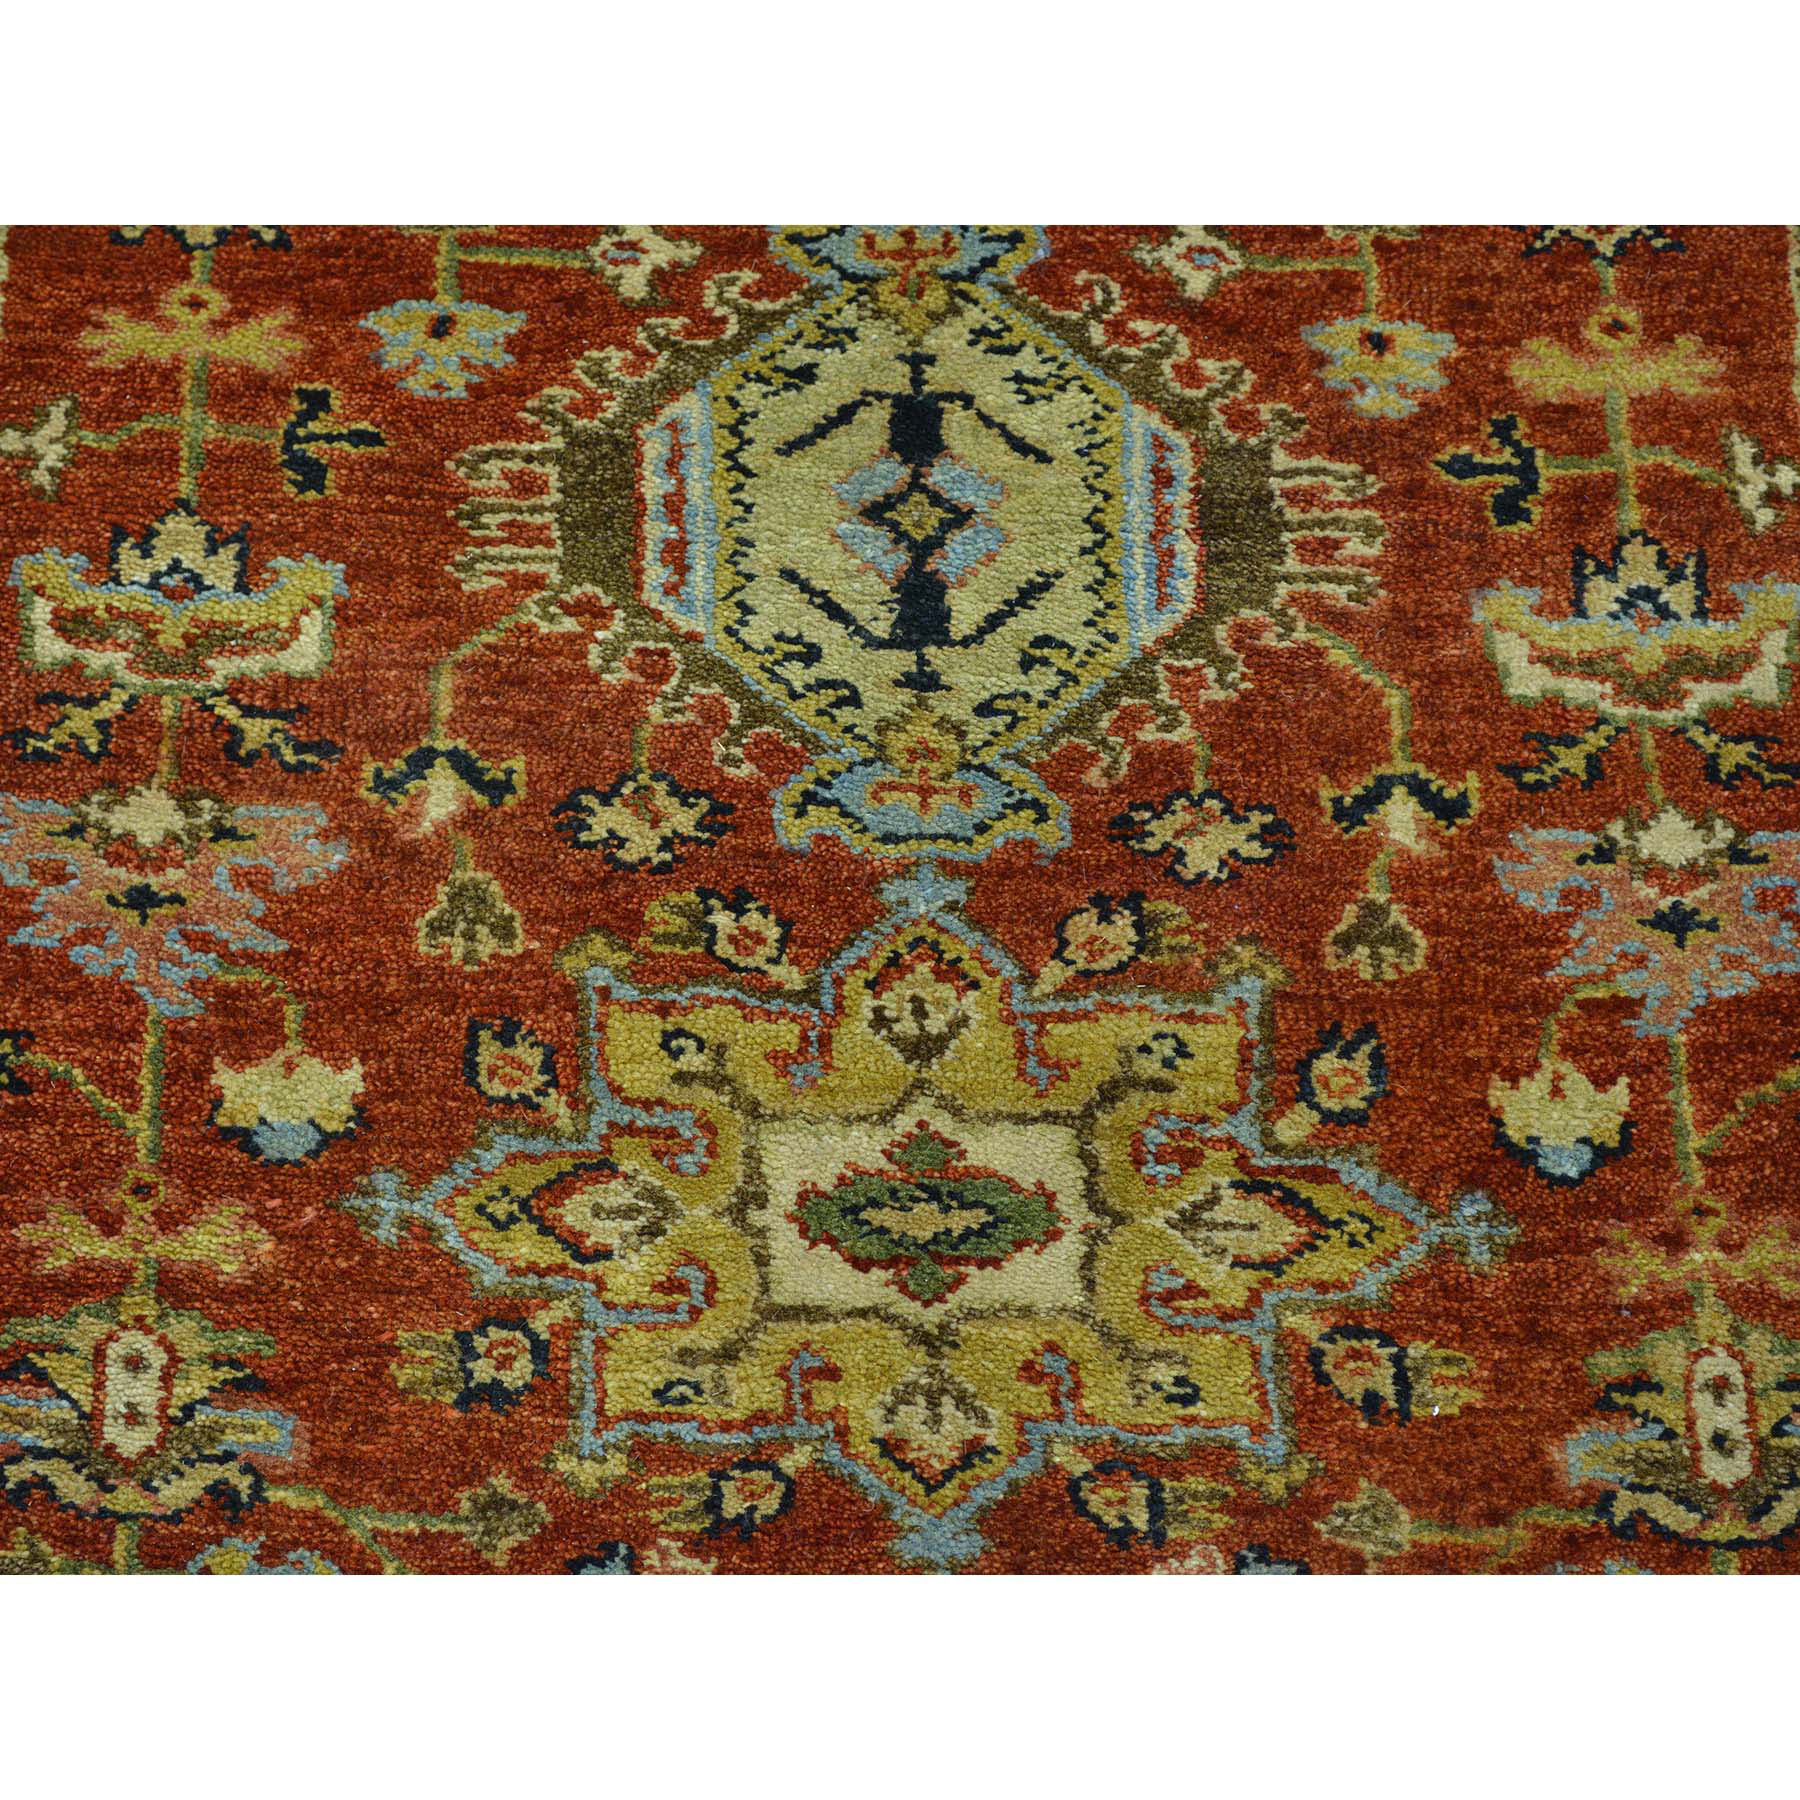 2-7 x19-10 - XL Runner Pure Wool Hand Knotted Rust Red Karajeh Oriental Rug 